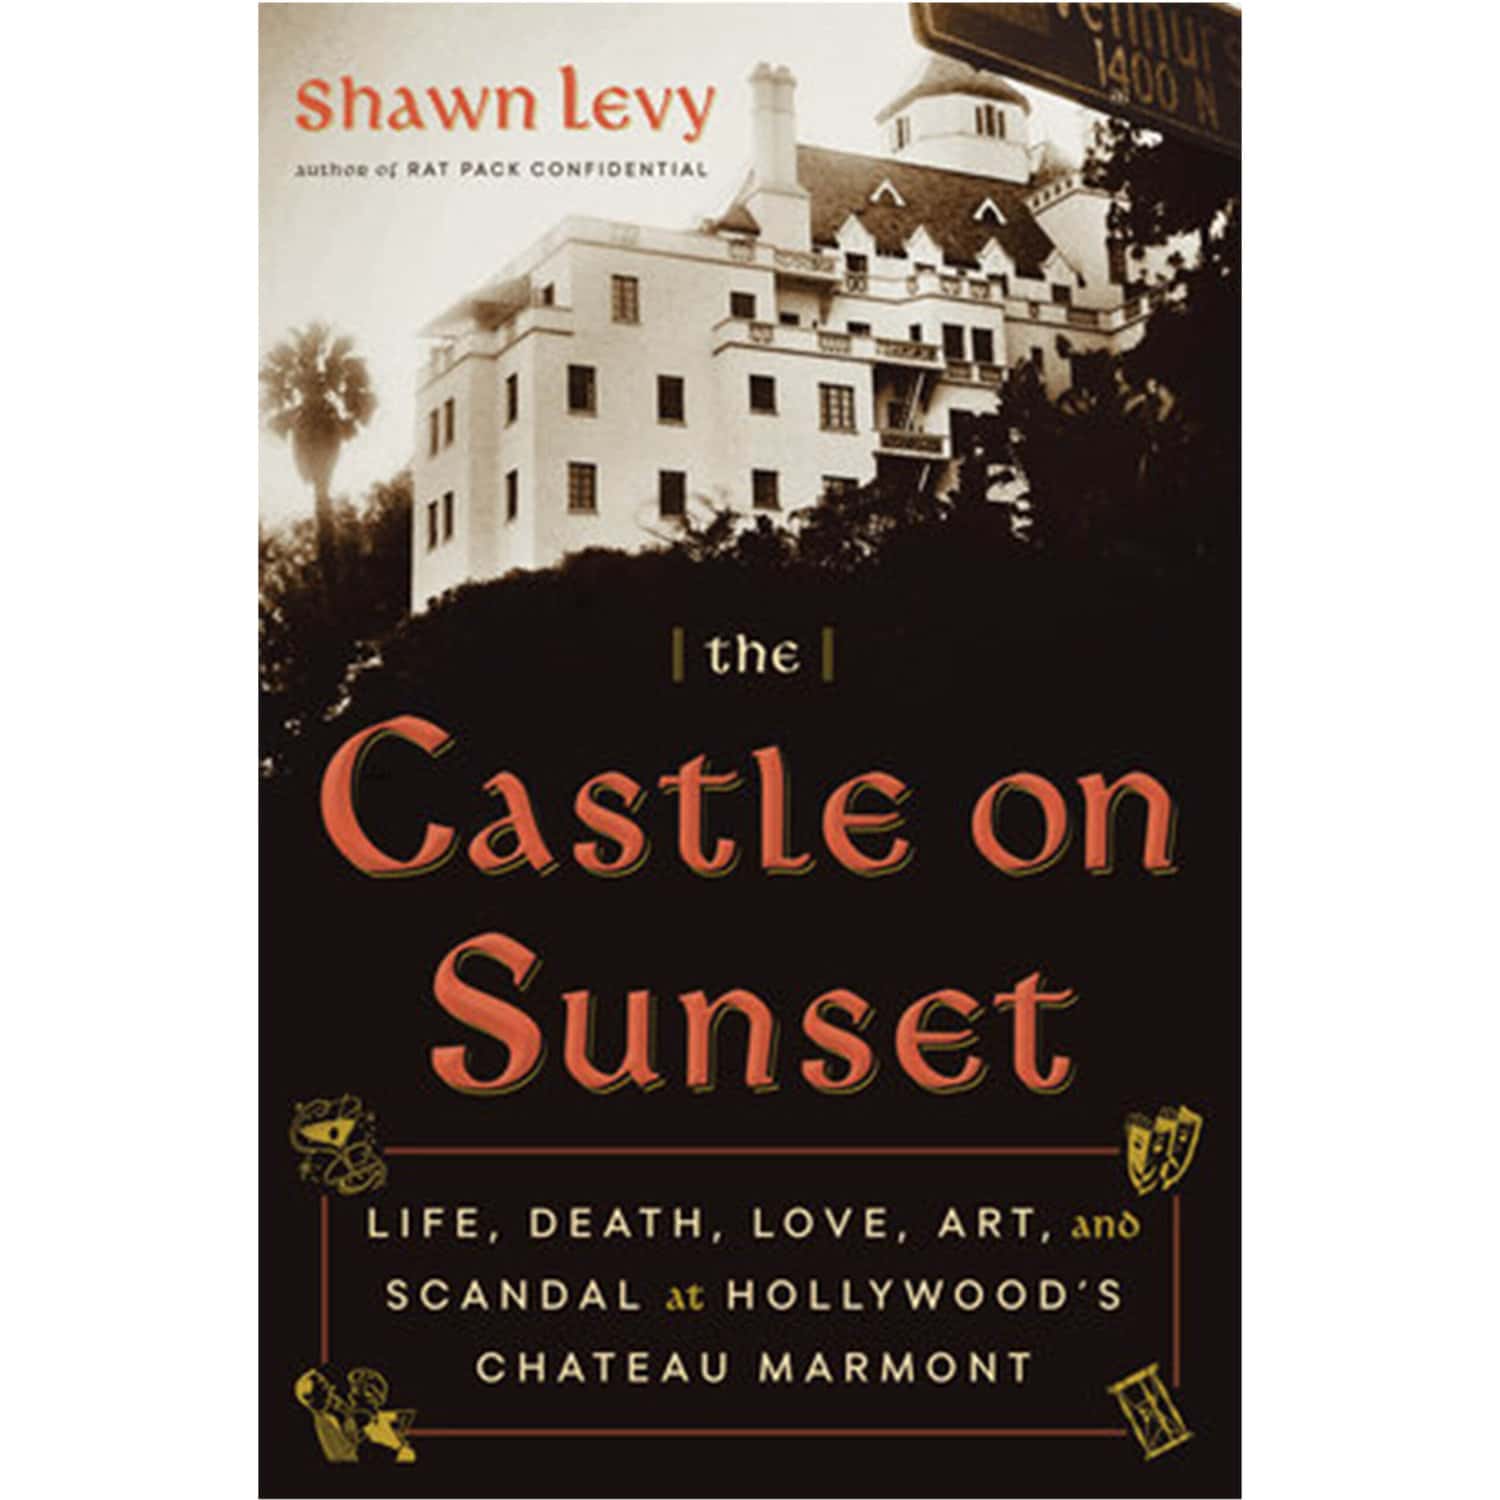 Castle on Sunset by Shawn Levy